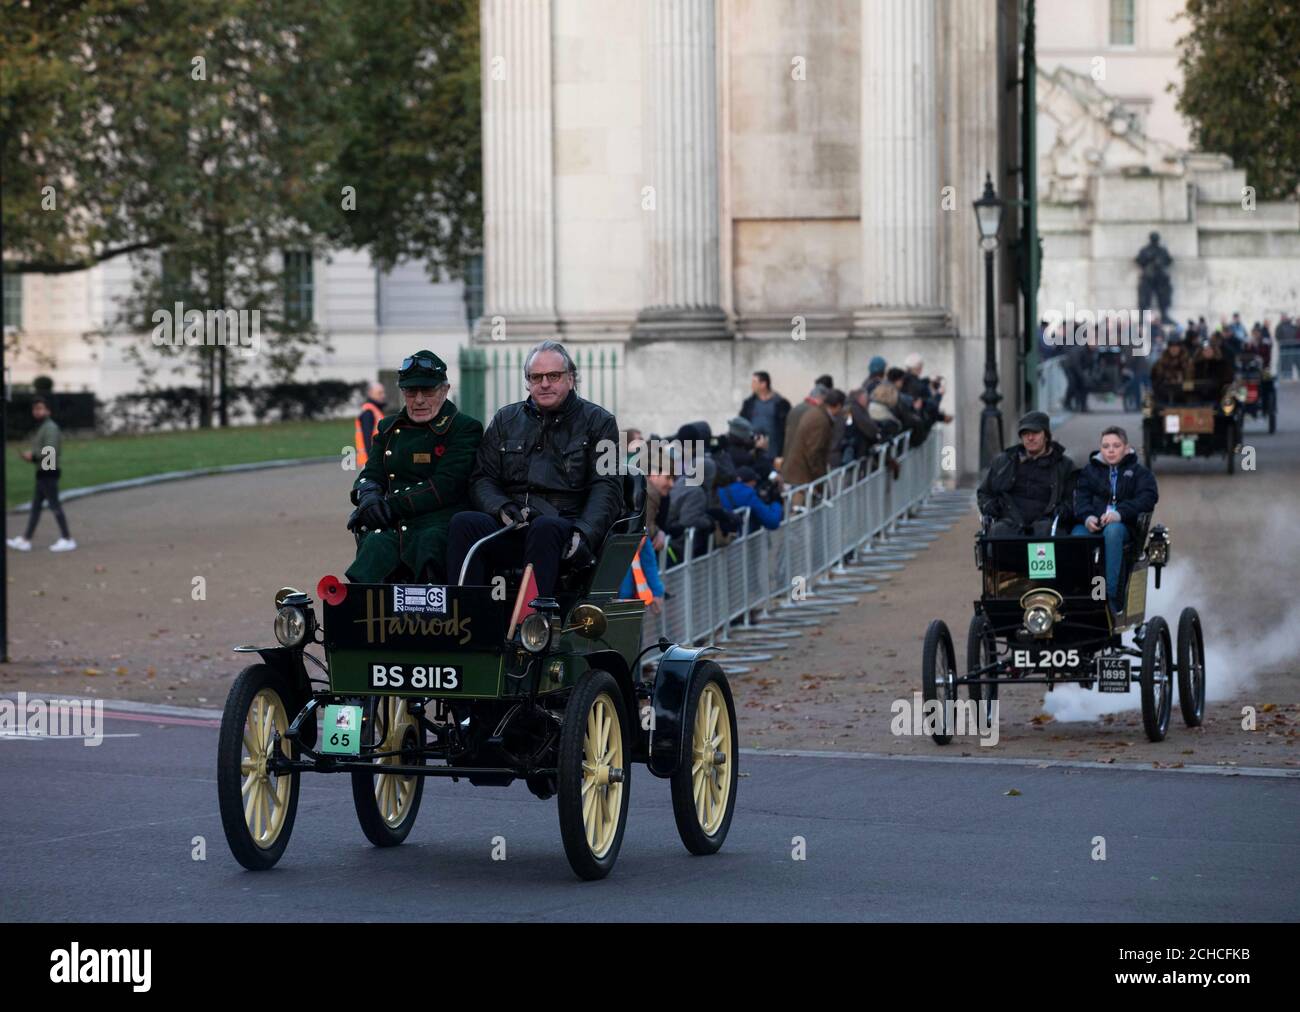 (Left-right) Len Brown Harrods curator of historic vehicles and James Healy, Harrods Director of Store Operations, driving the Harrods 1901 veteran Pope Waverley electric car through Hyde Park Corner during the annual Bonhams London to Brighton Veteran Car Run supported by Hiscox. Stock Photo